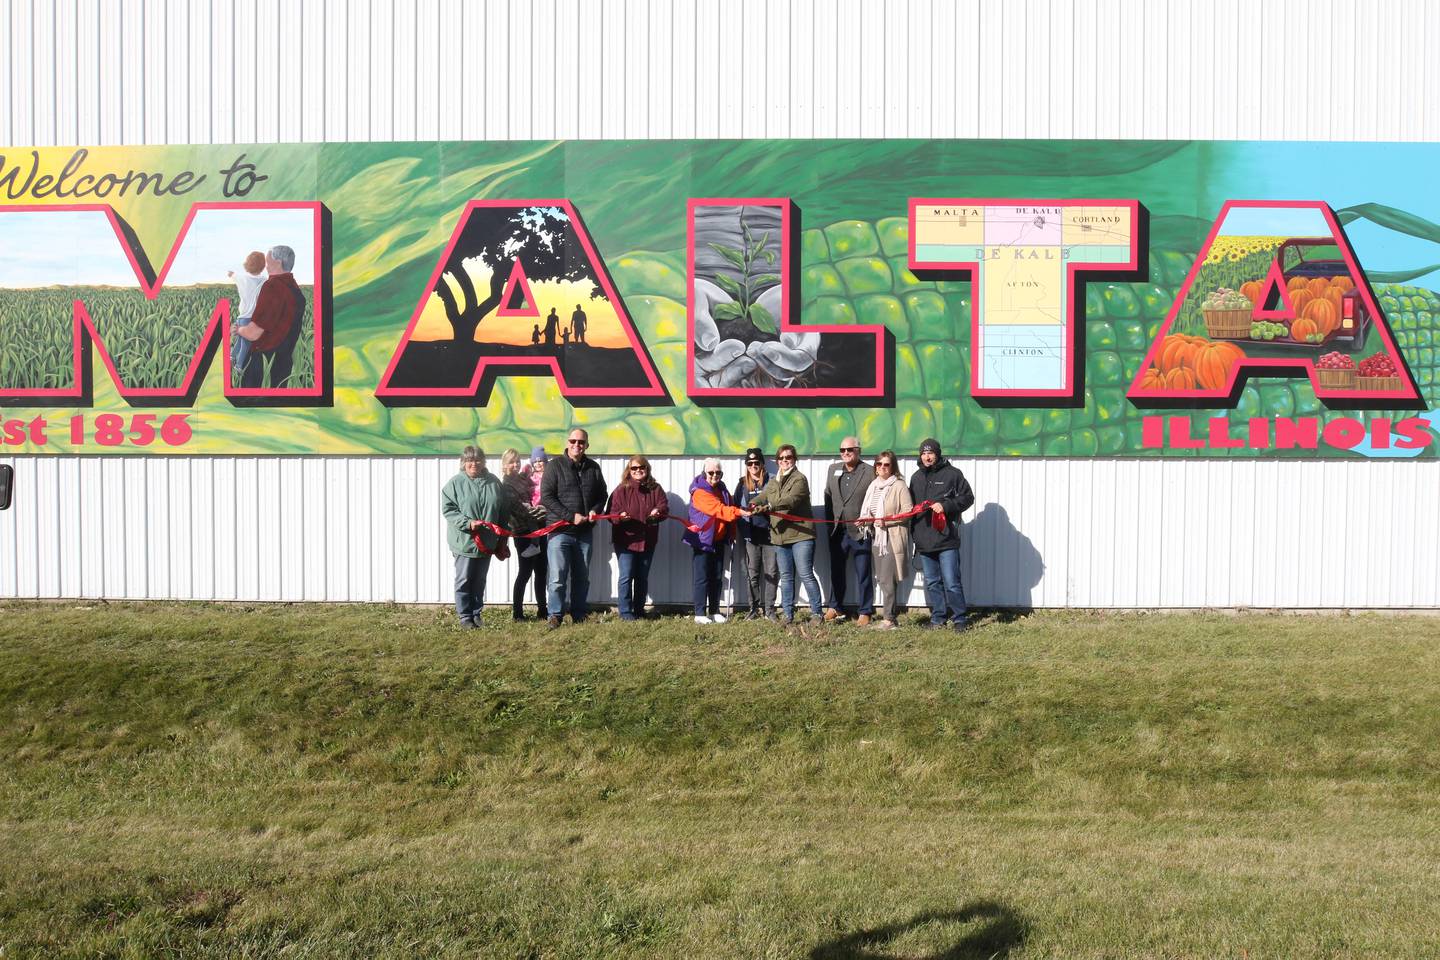 The ribbon is cut by Malta city officials and other people responsible for the completion of the project including Dixon artist Nora Balayti and building owner Shirley Kyler on Wednesday, October 19, 2022, at north side of Route 38 in Malta.  The mural, which spells out Malta in large capital letters, shows the values ​​of the city with themes of agriculture, family, community and growth.